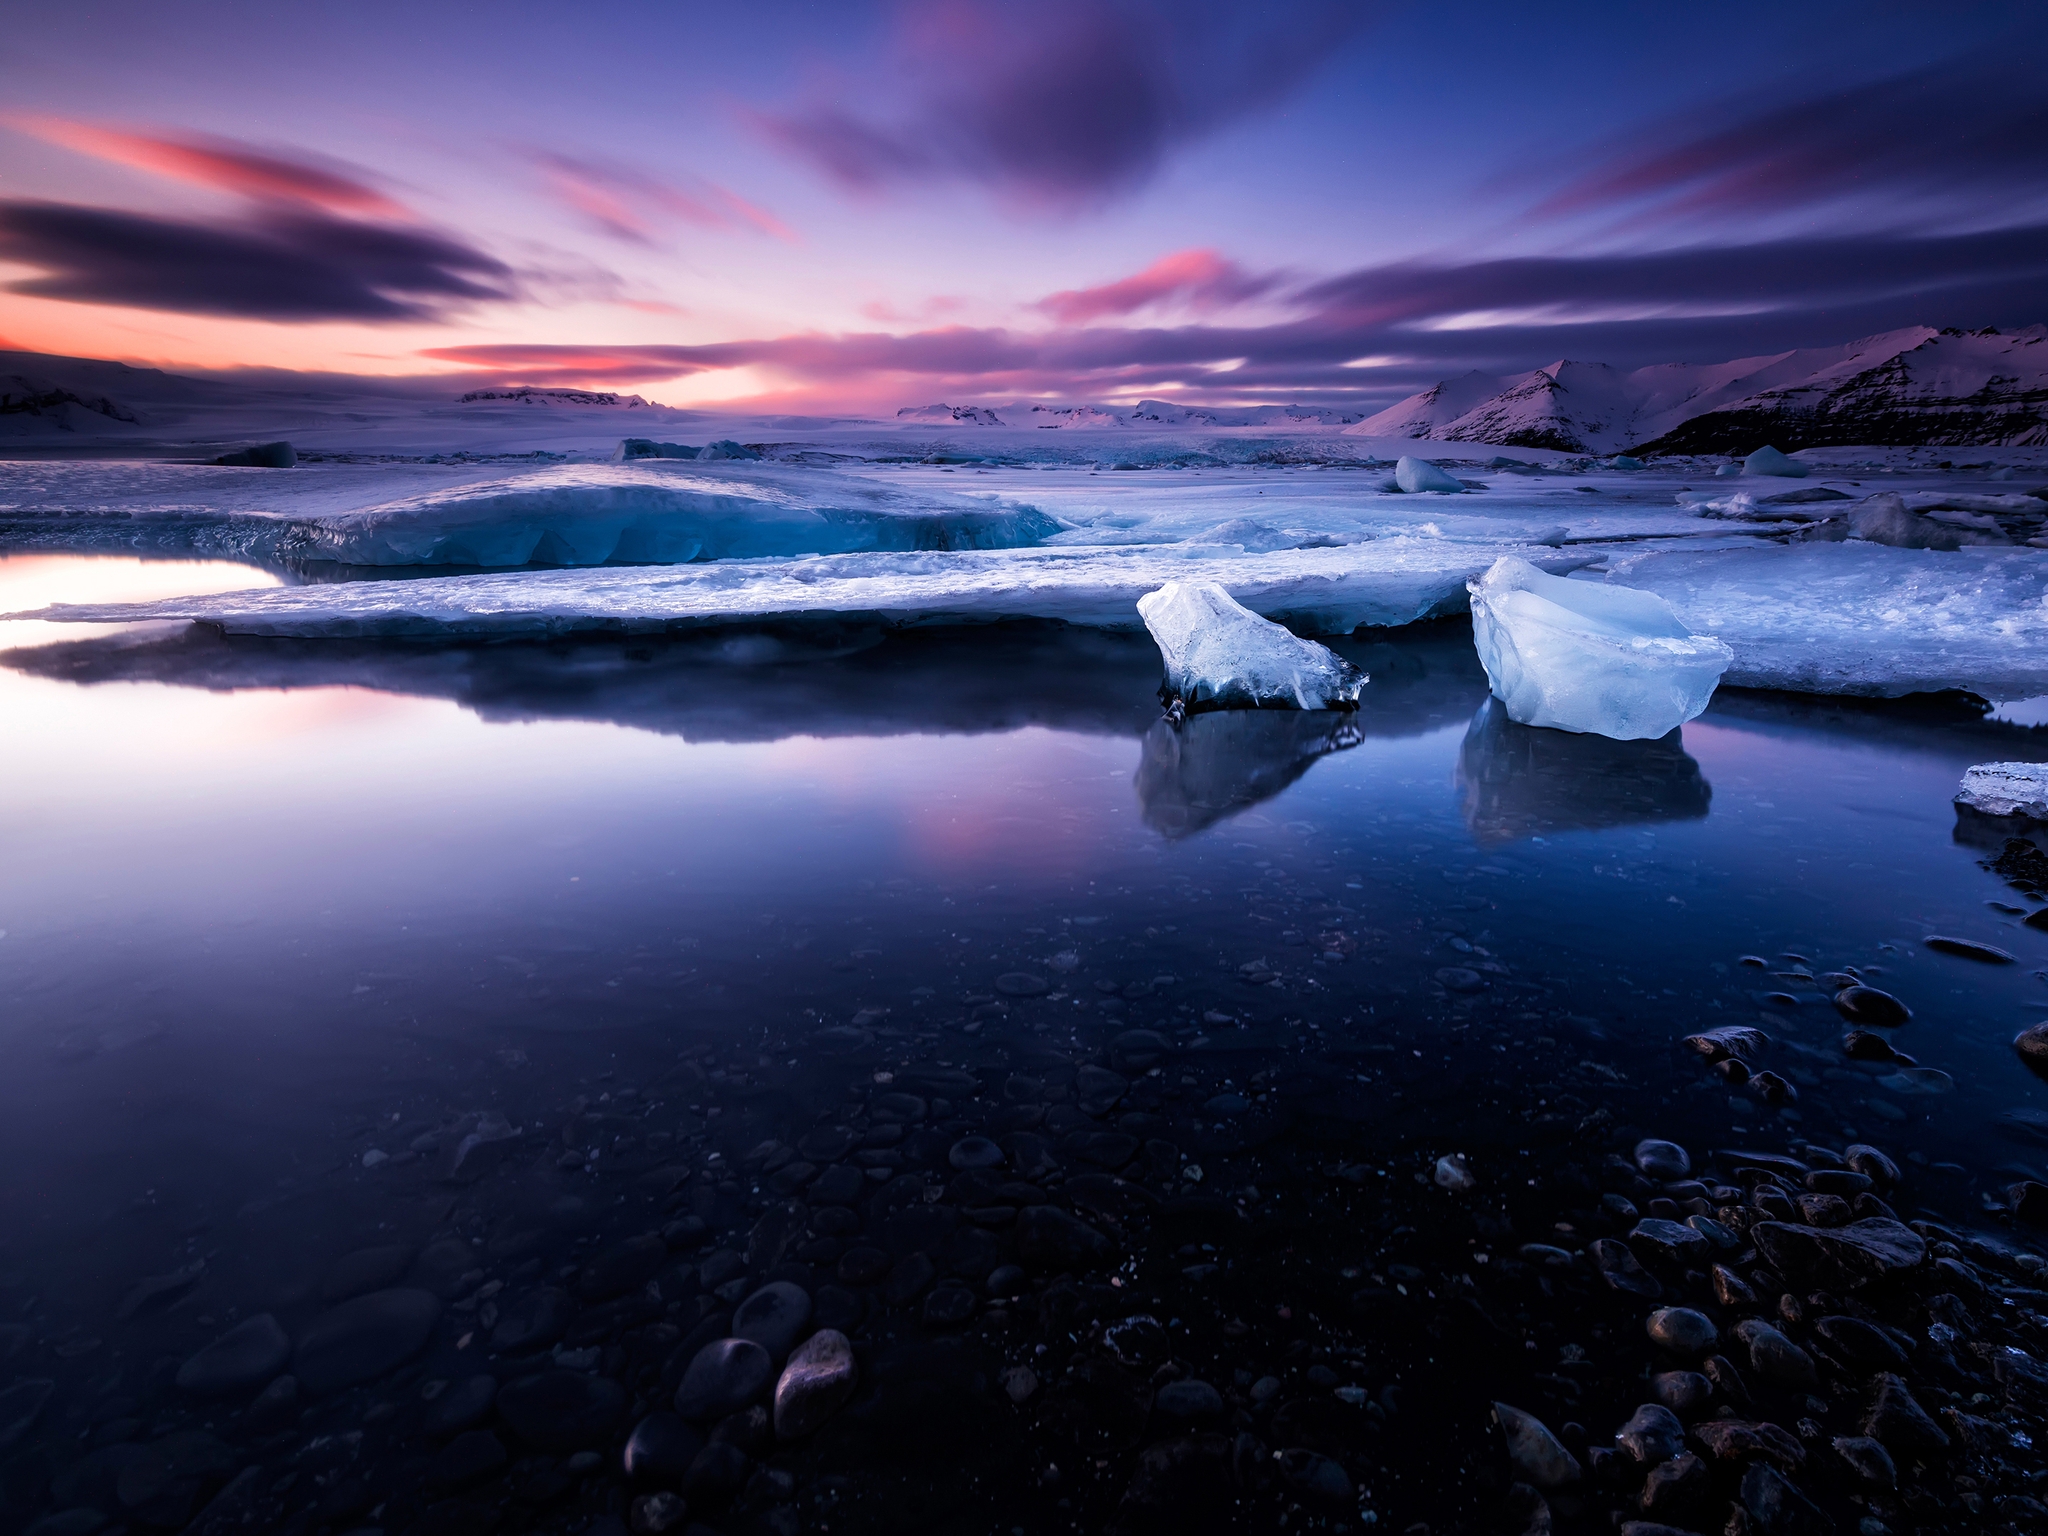 Image: Water, ice, shore, stone, mountains, sky